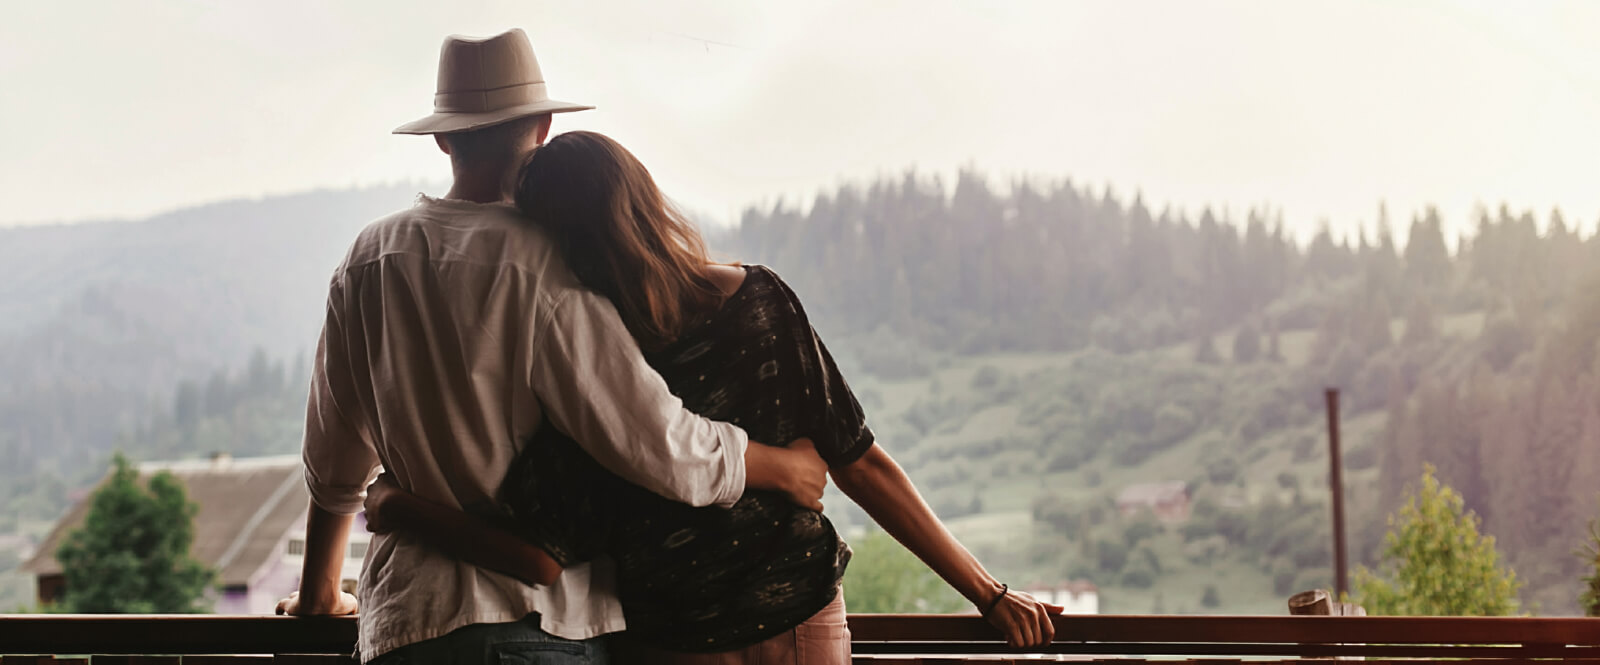 Young couple embracing while looking out at a mountain